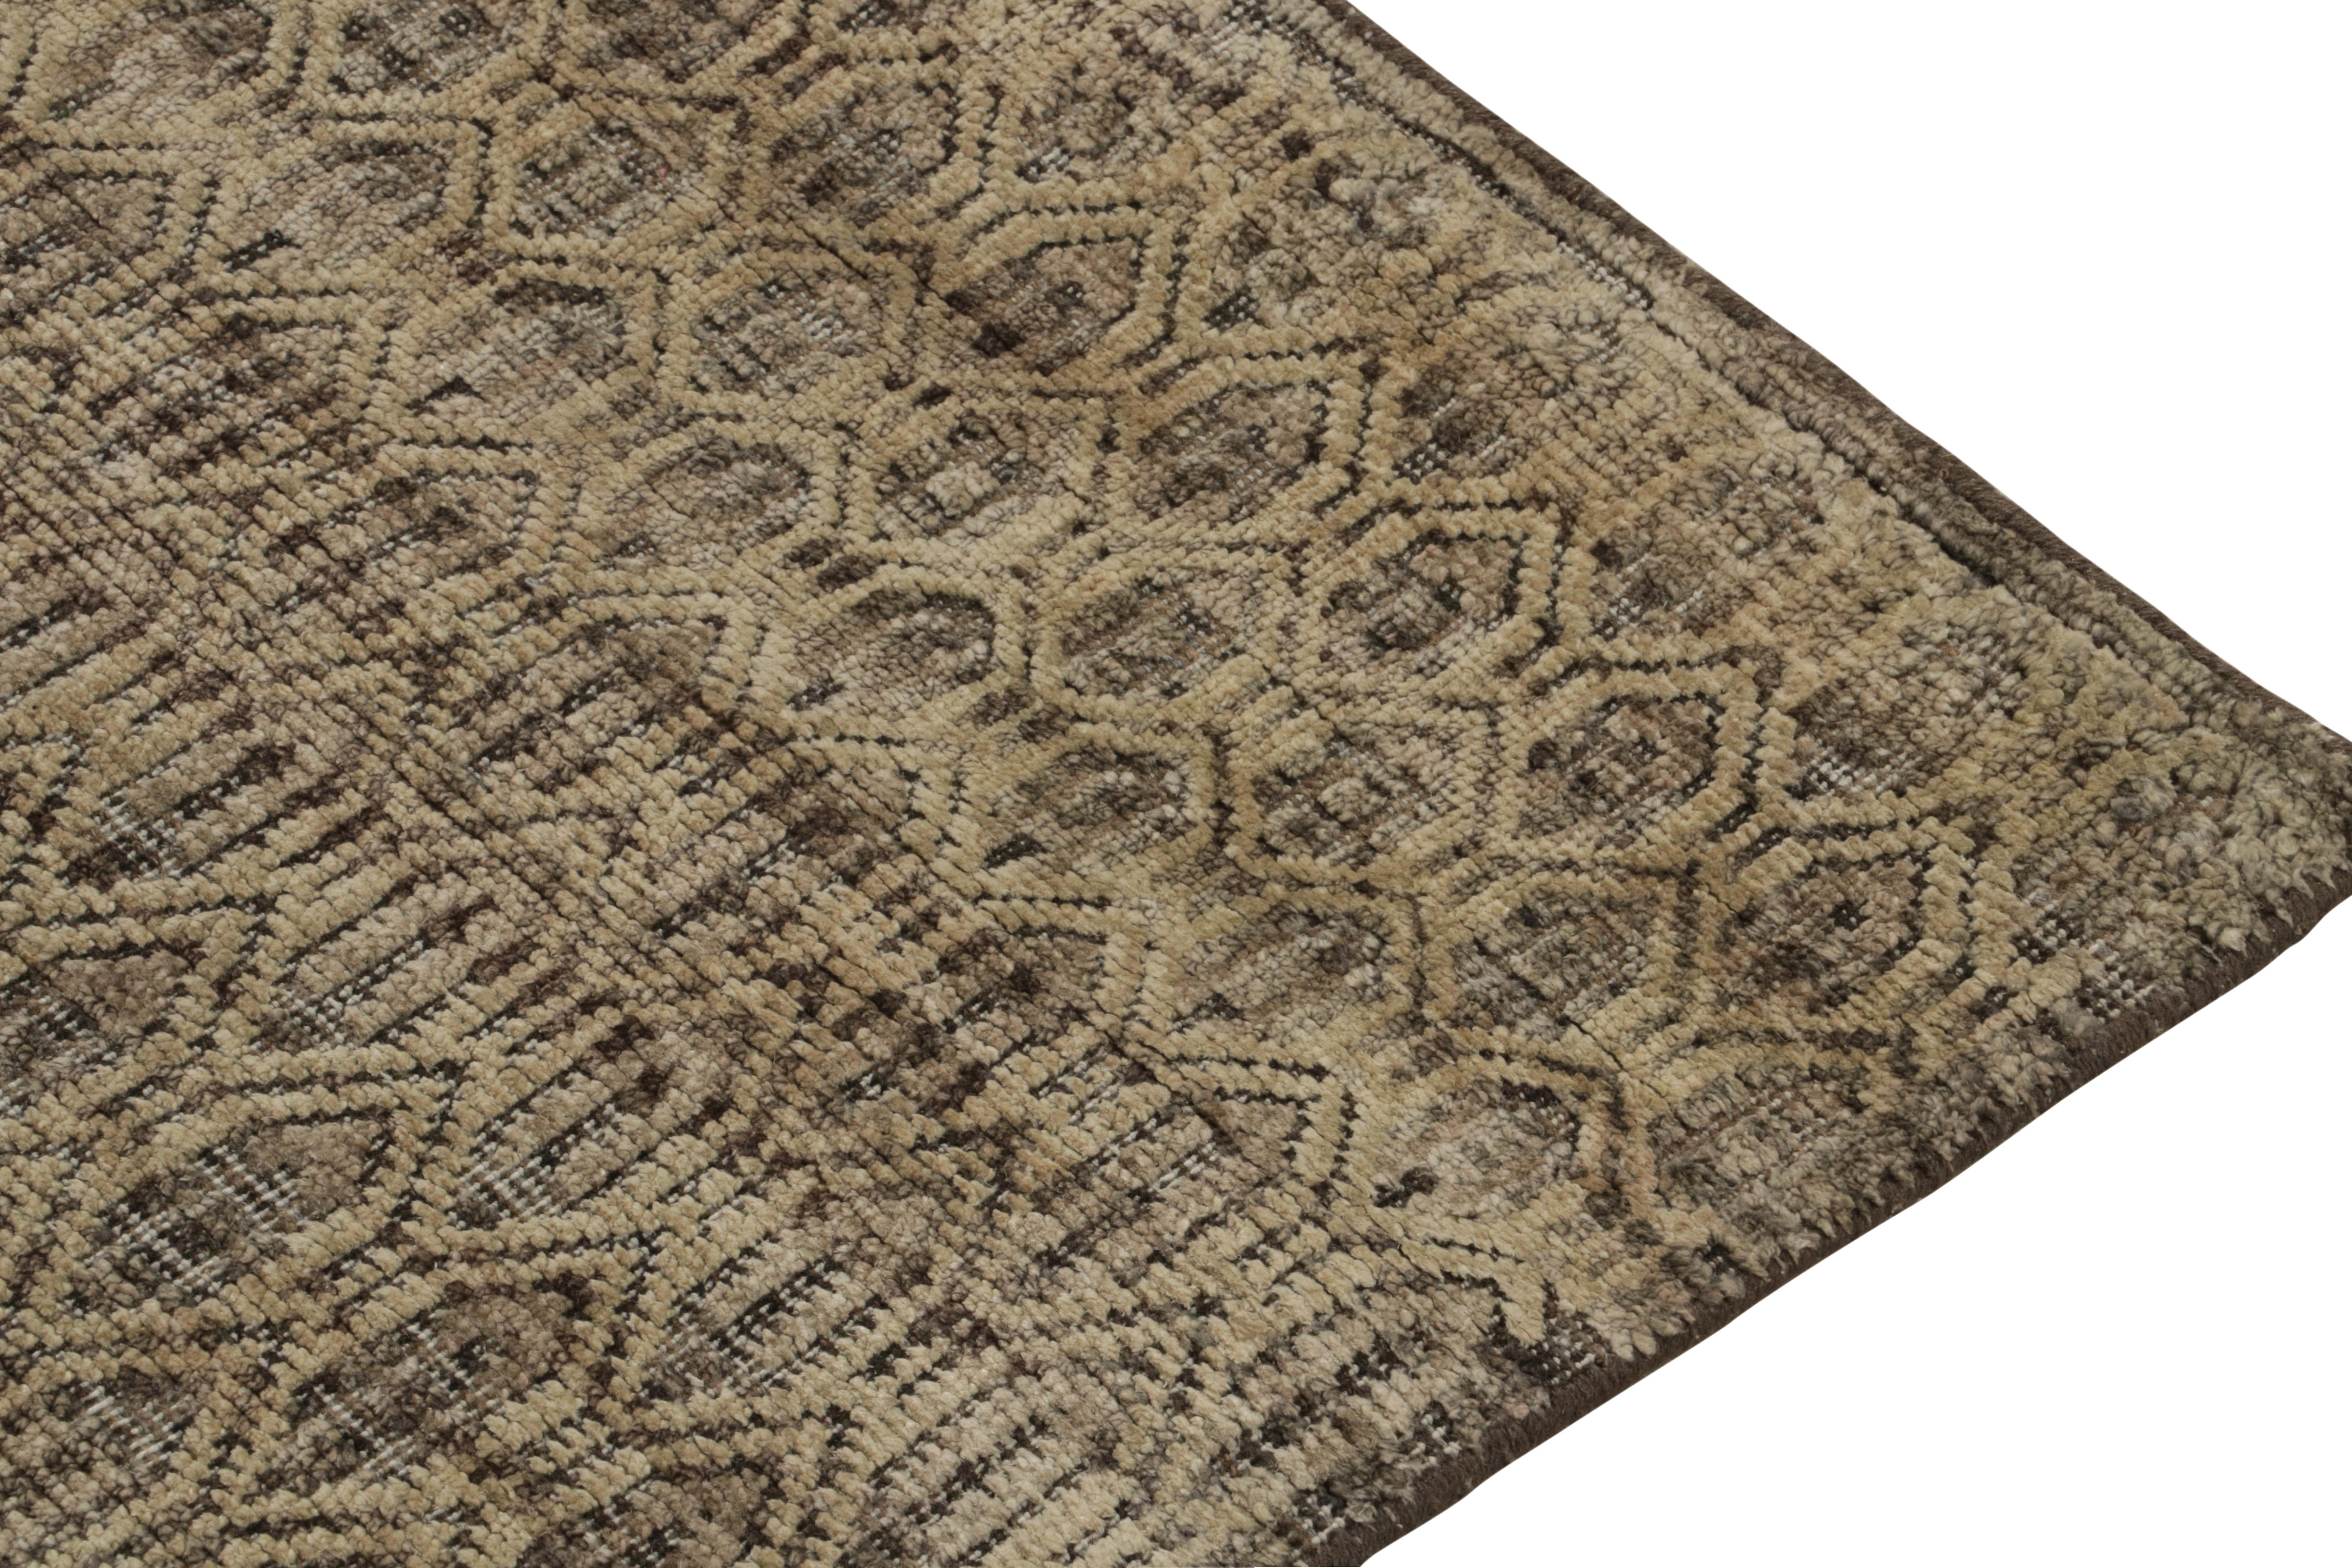 Rug & Kilim’s Modern Textural Runner in Beige-Brown High-Low Geometric Patterns In New Condition For Sale In Long Island City, NY